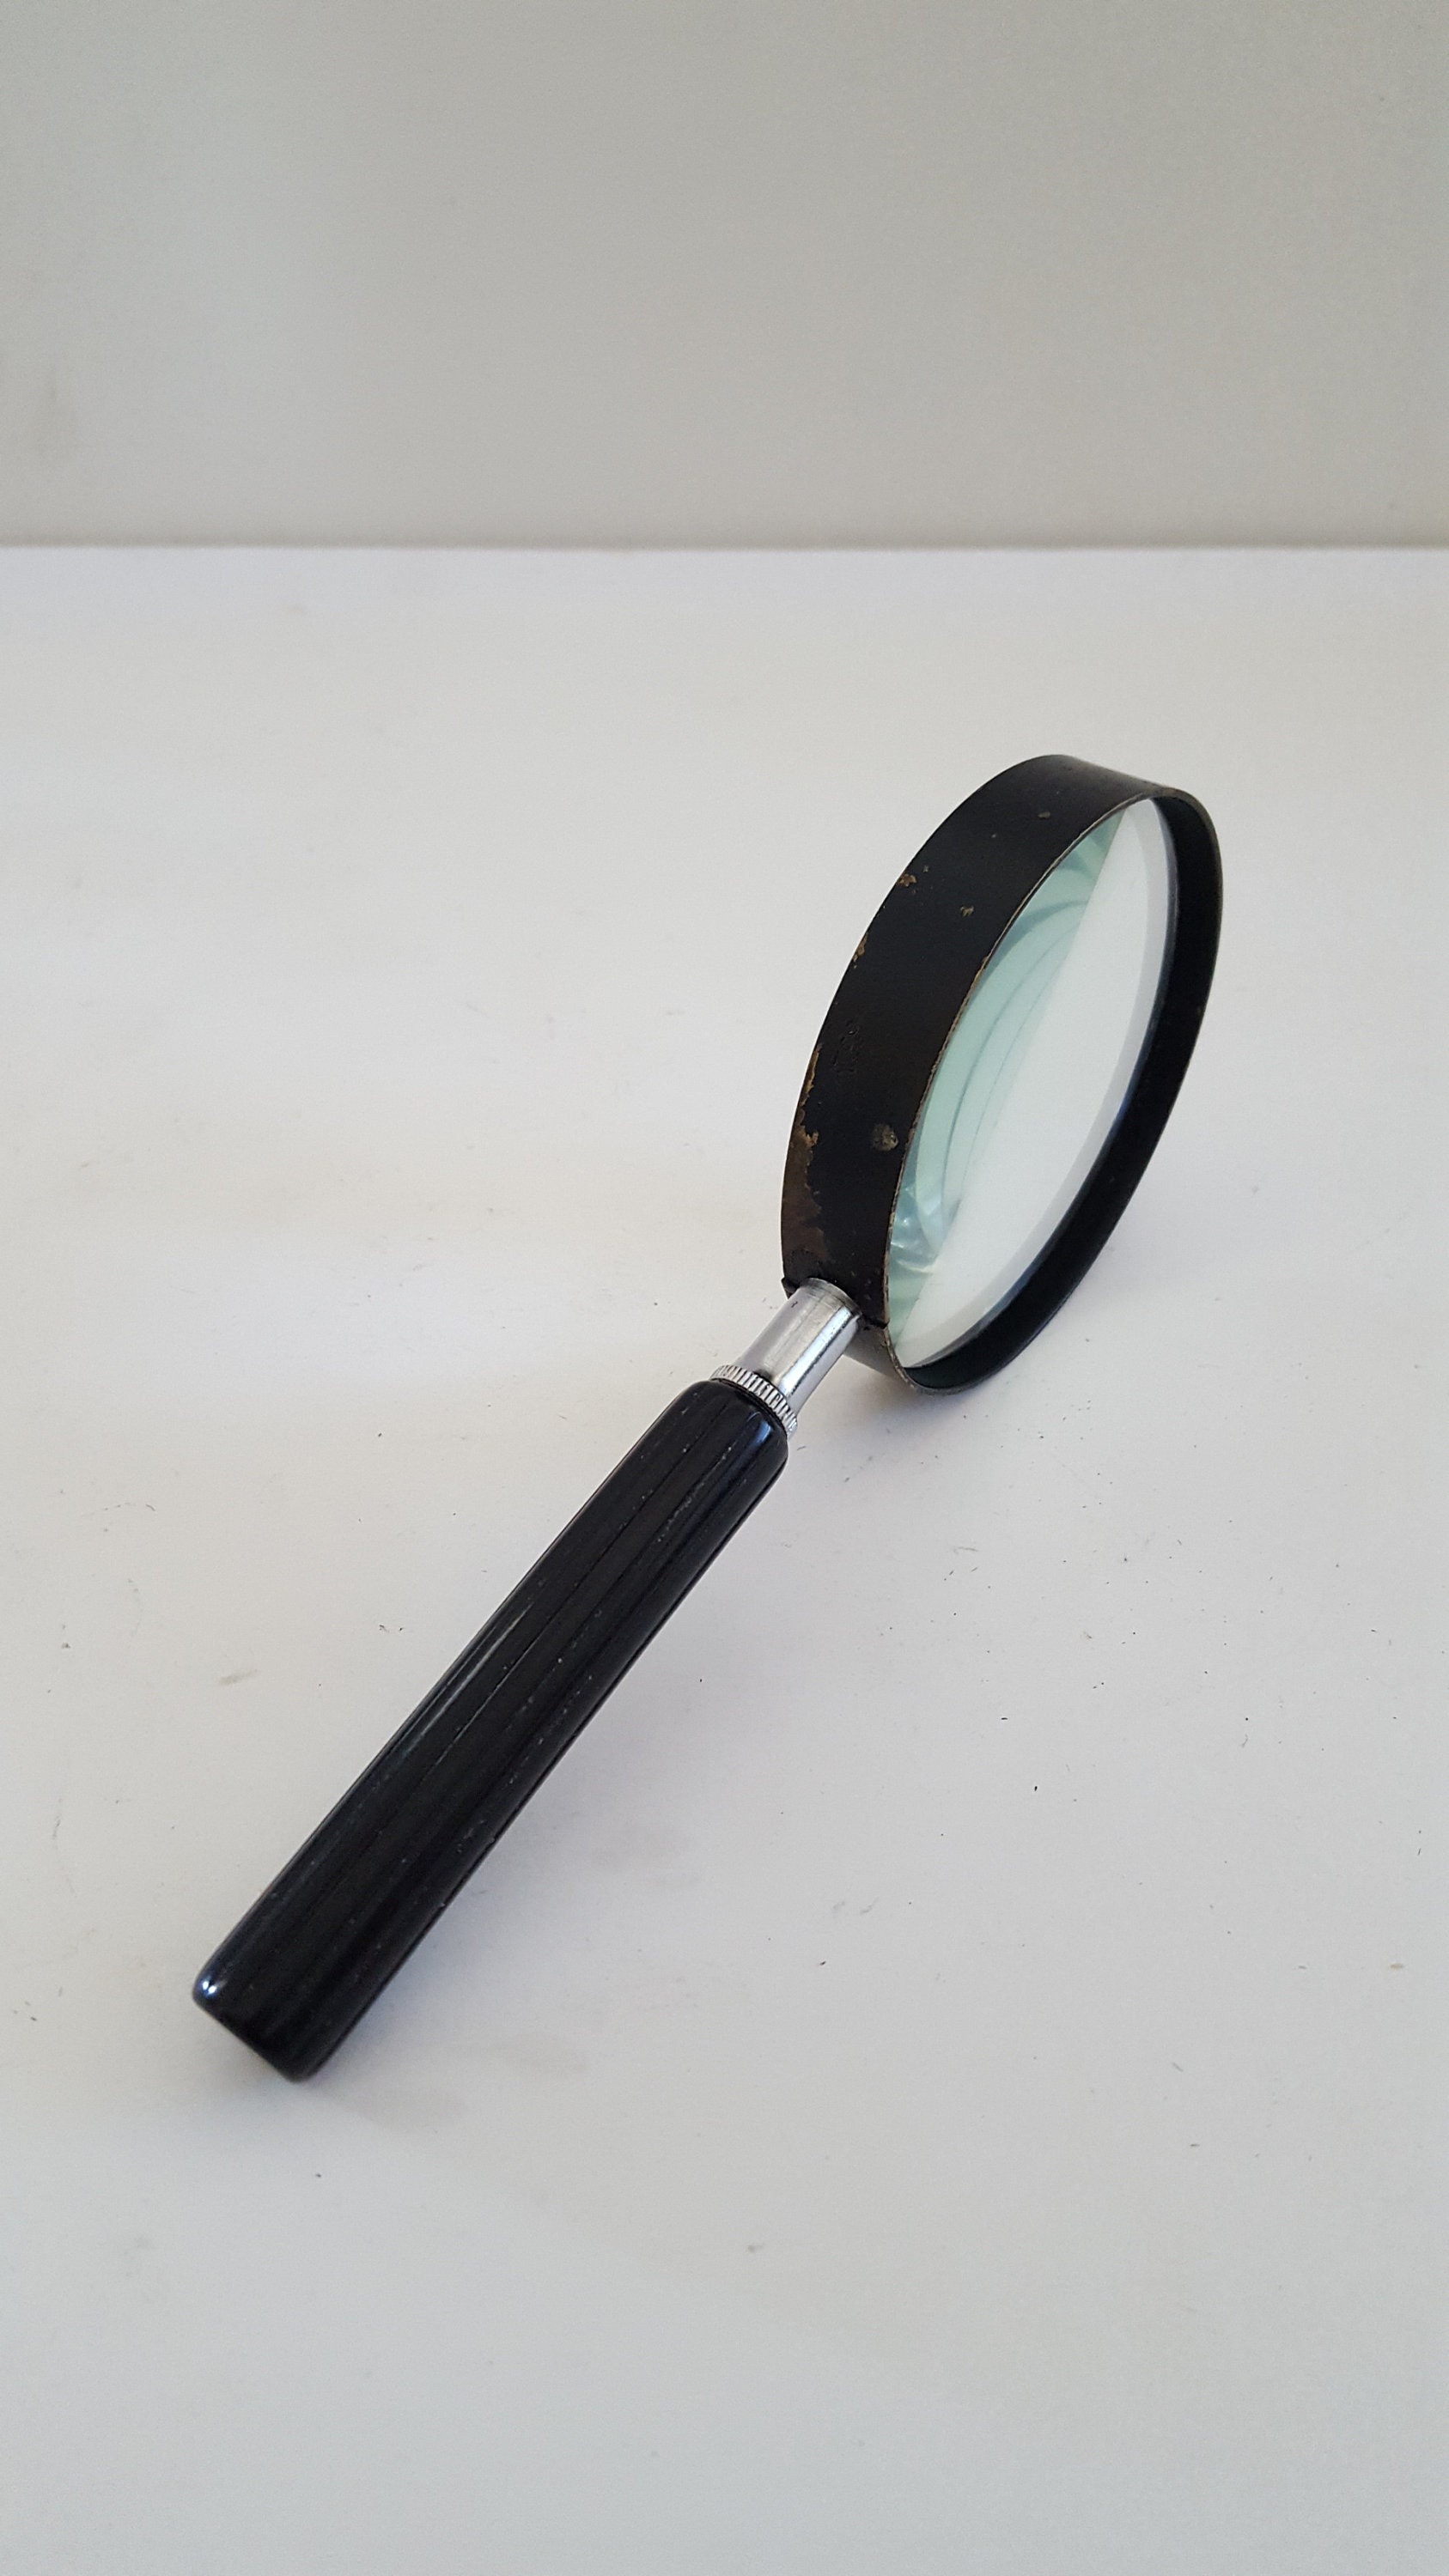 Galco Magnifying Glass with Case, Dark Havana Brown